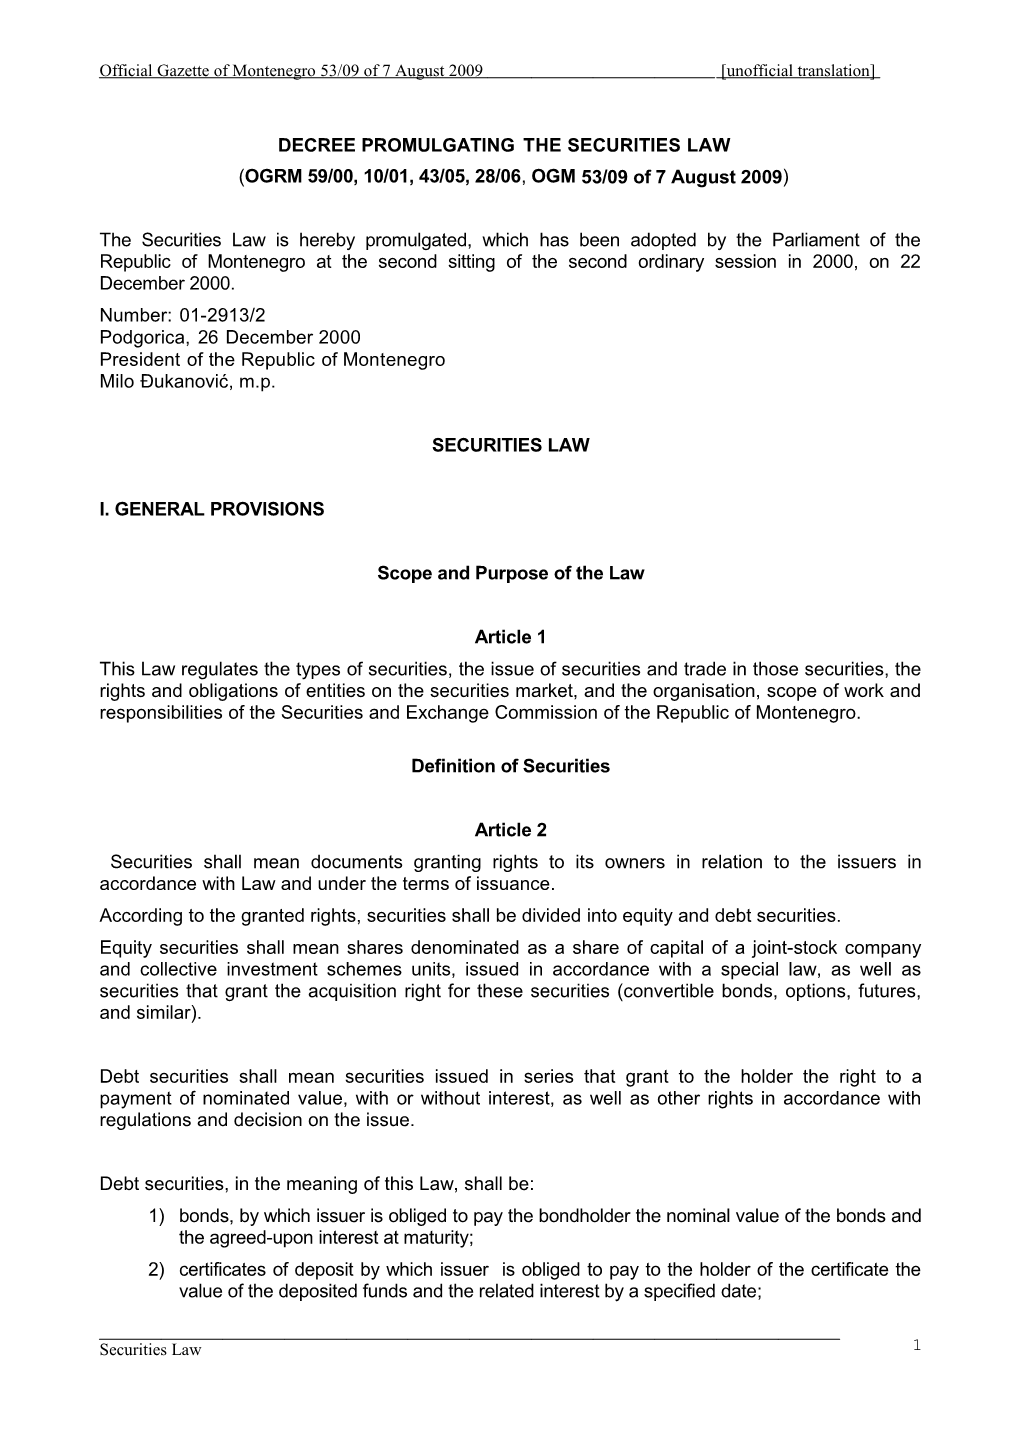 Official Gazette of Montenegro 53/09 of 7 August 2009 Unofficial Translation